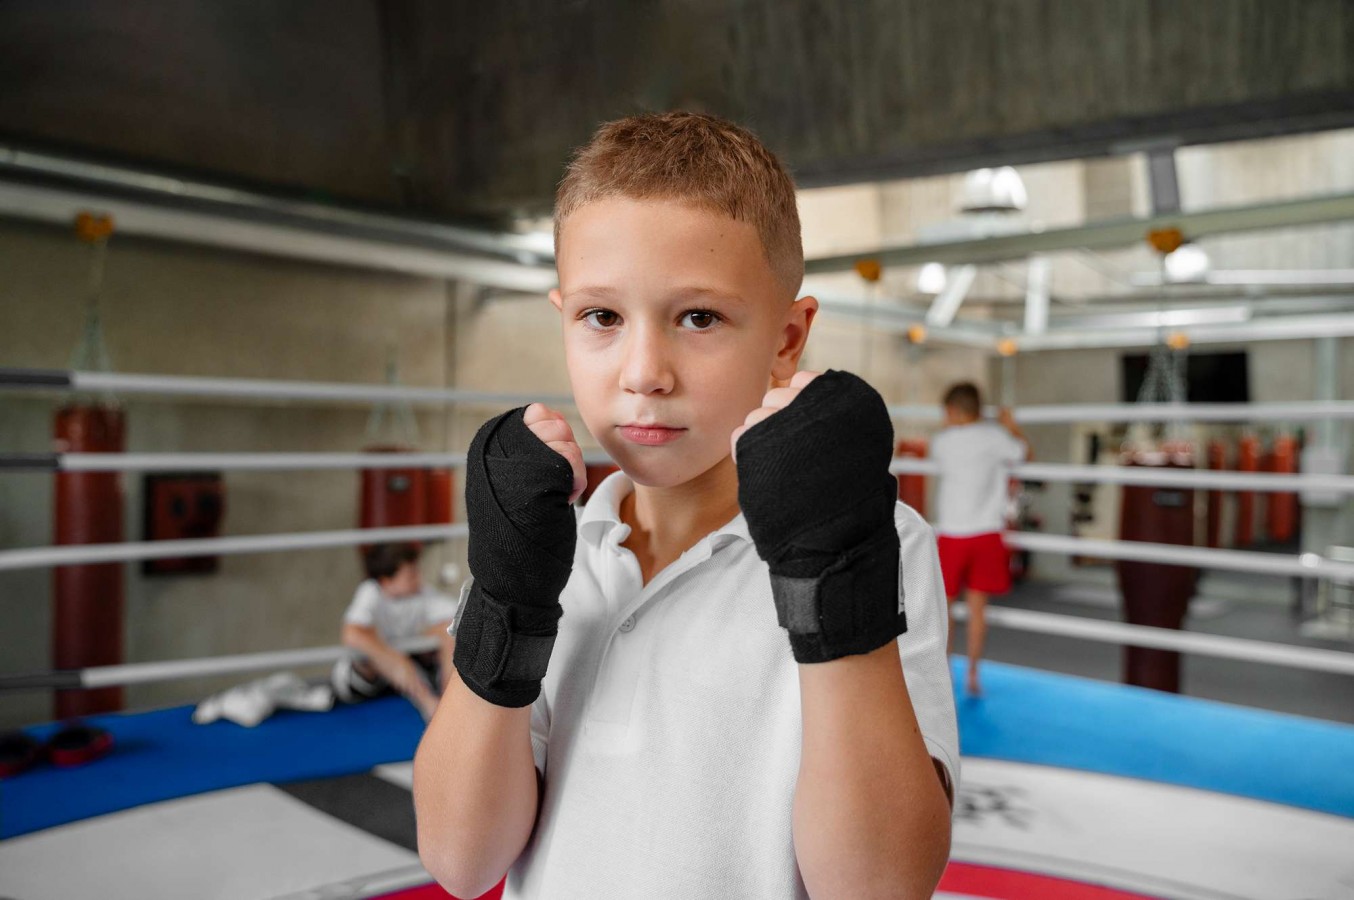 Here's How You Can Teach Self-Defense For Kids